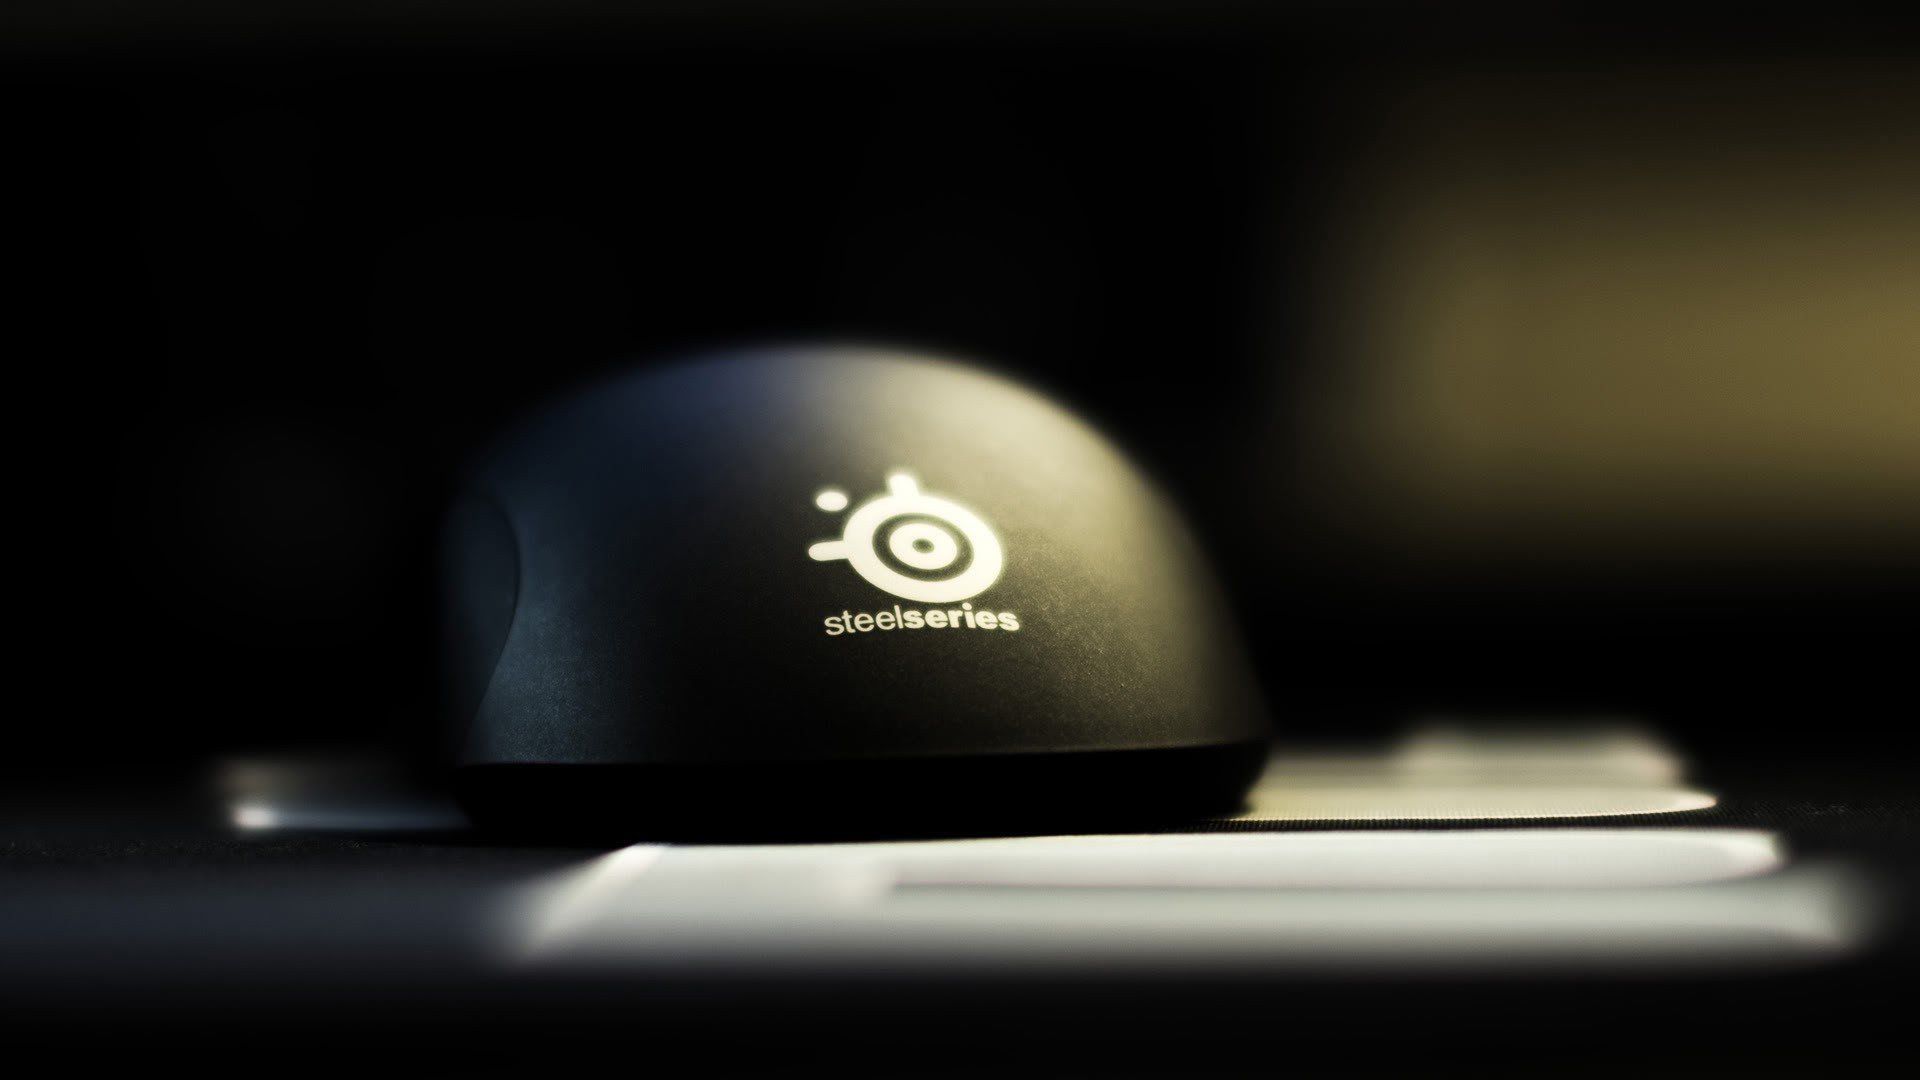 STEELSERIES Gaming computer mouse ds wallpaper 1920x1080